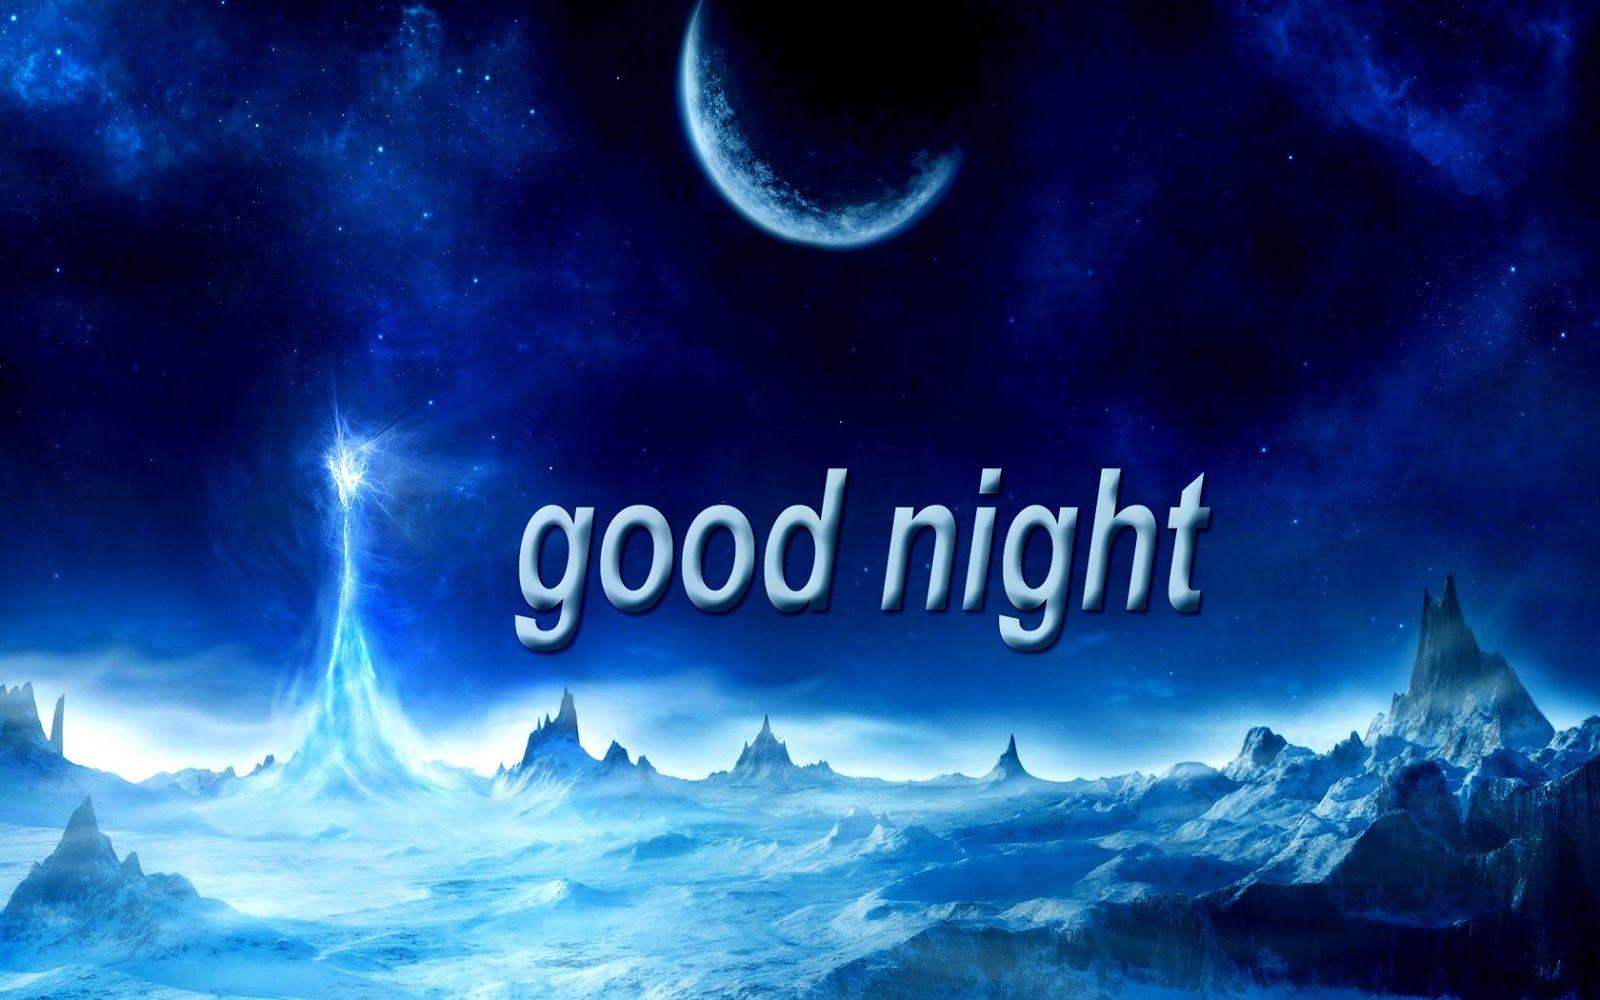 Good Night Image for Whatsapp and Facebook (Best)